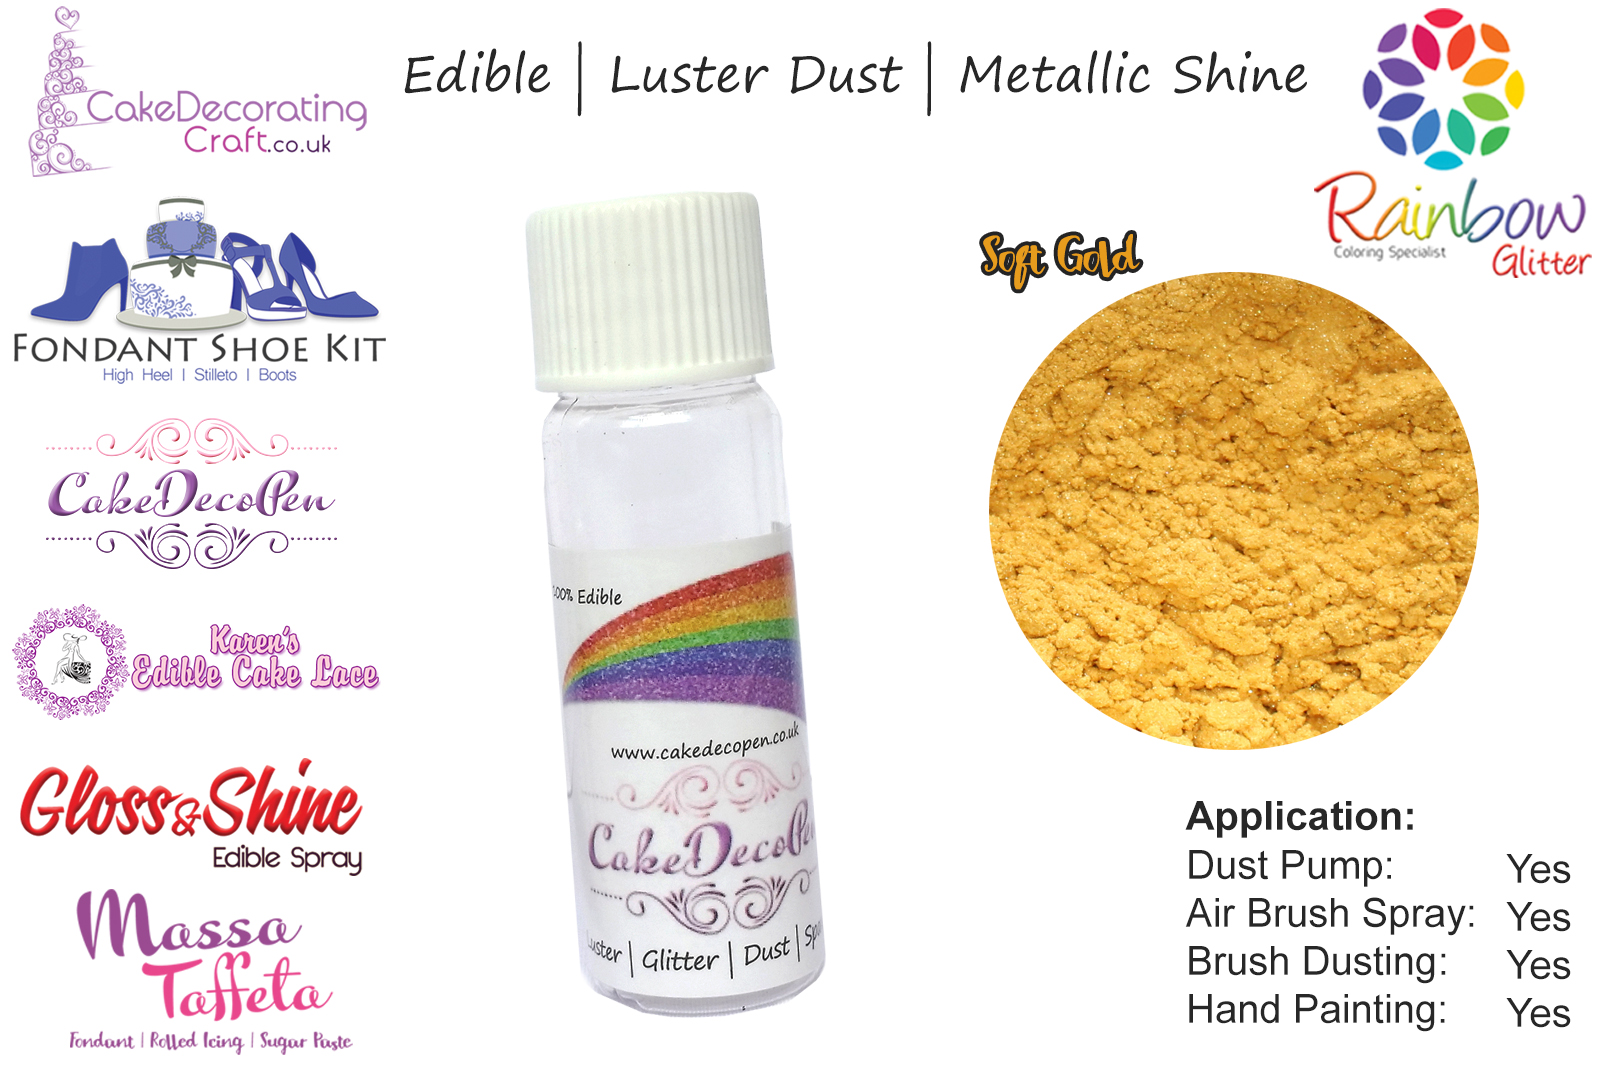 Soft Gold | Pearled | Luster | Shimmer | Gloss | Edible Dust | 4 Gram Tube | Cake Decorating Craft